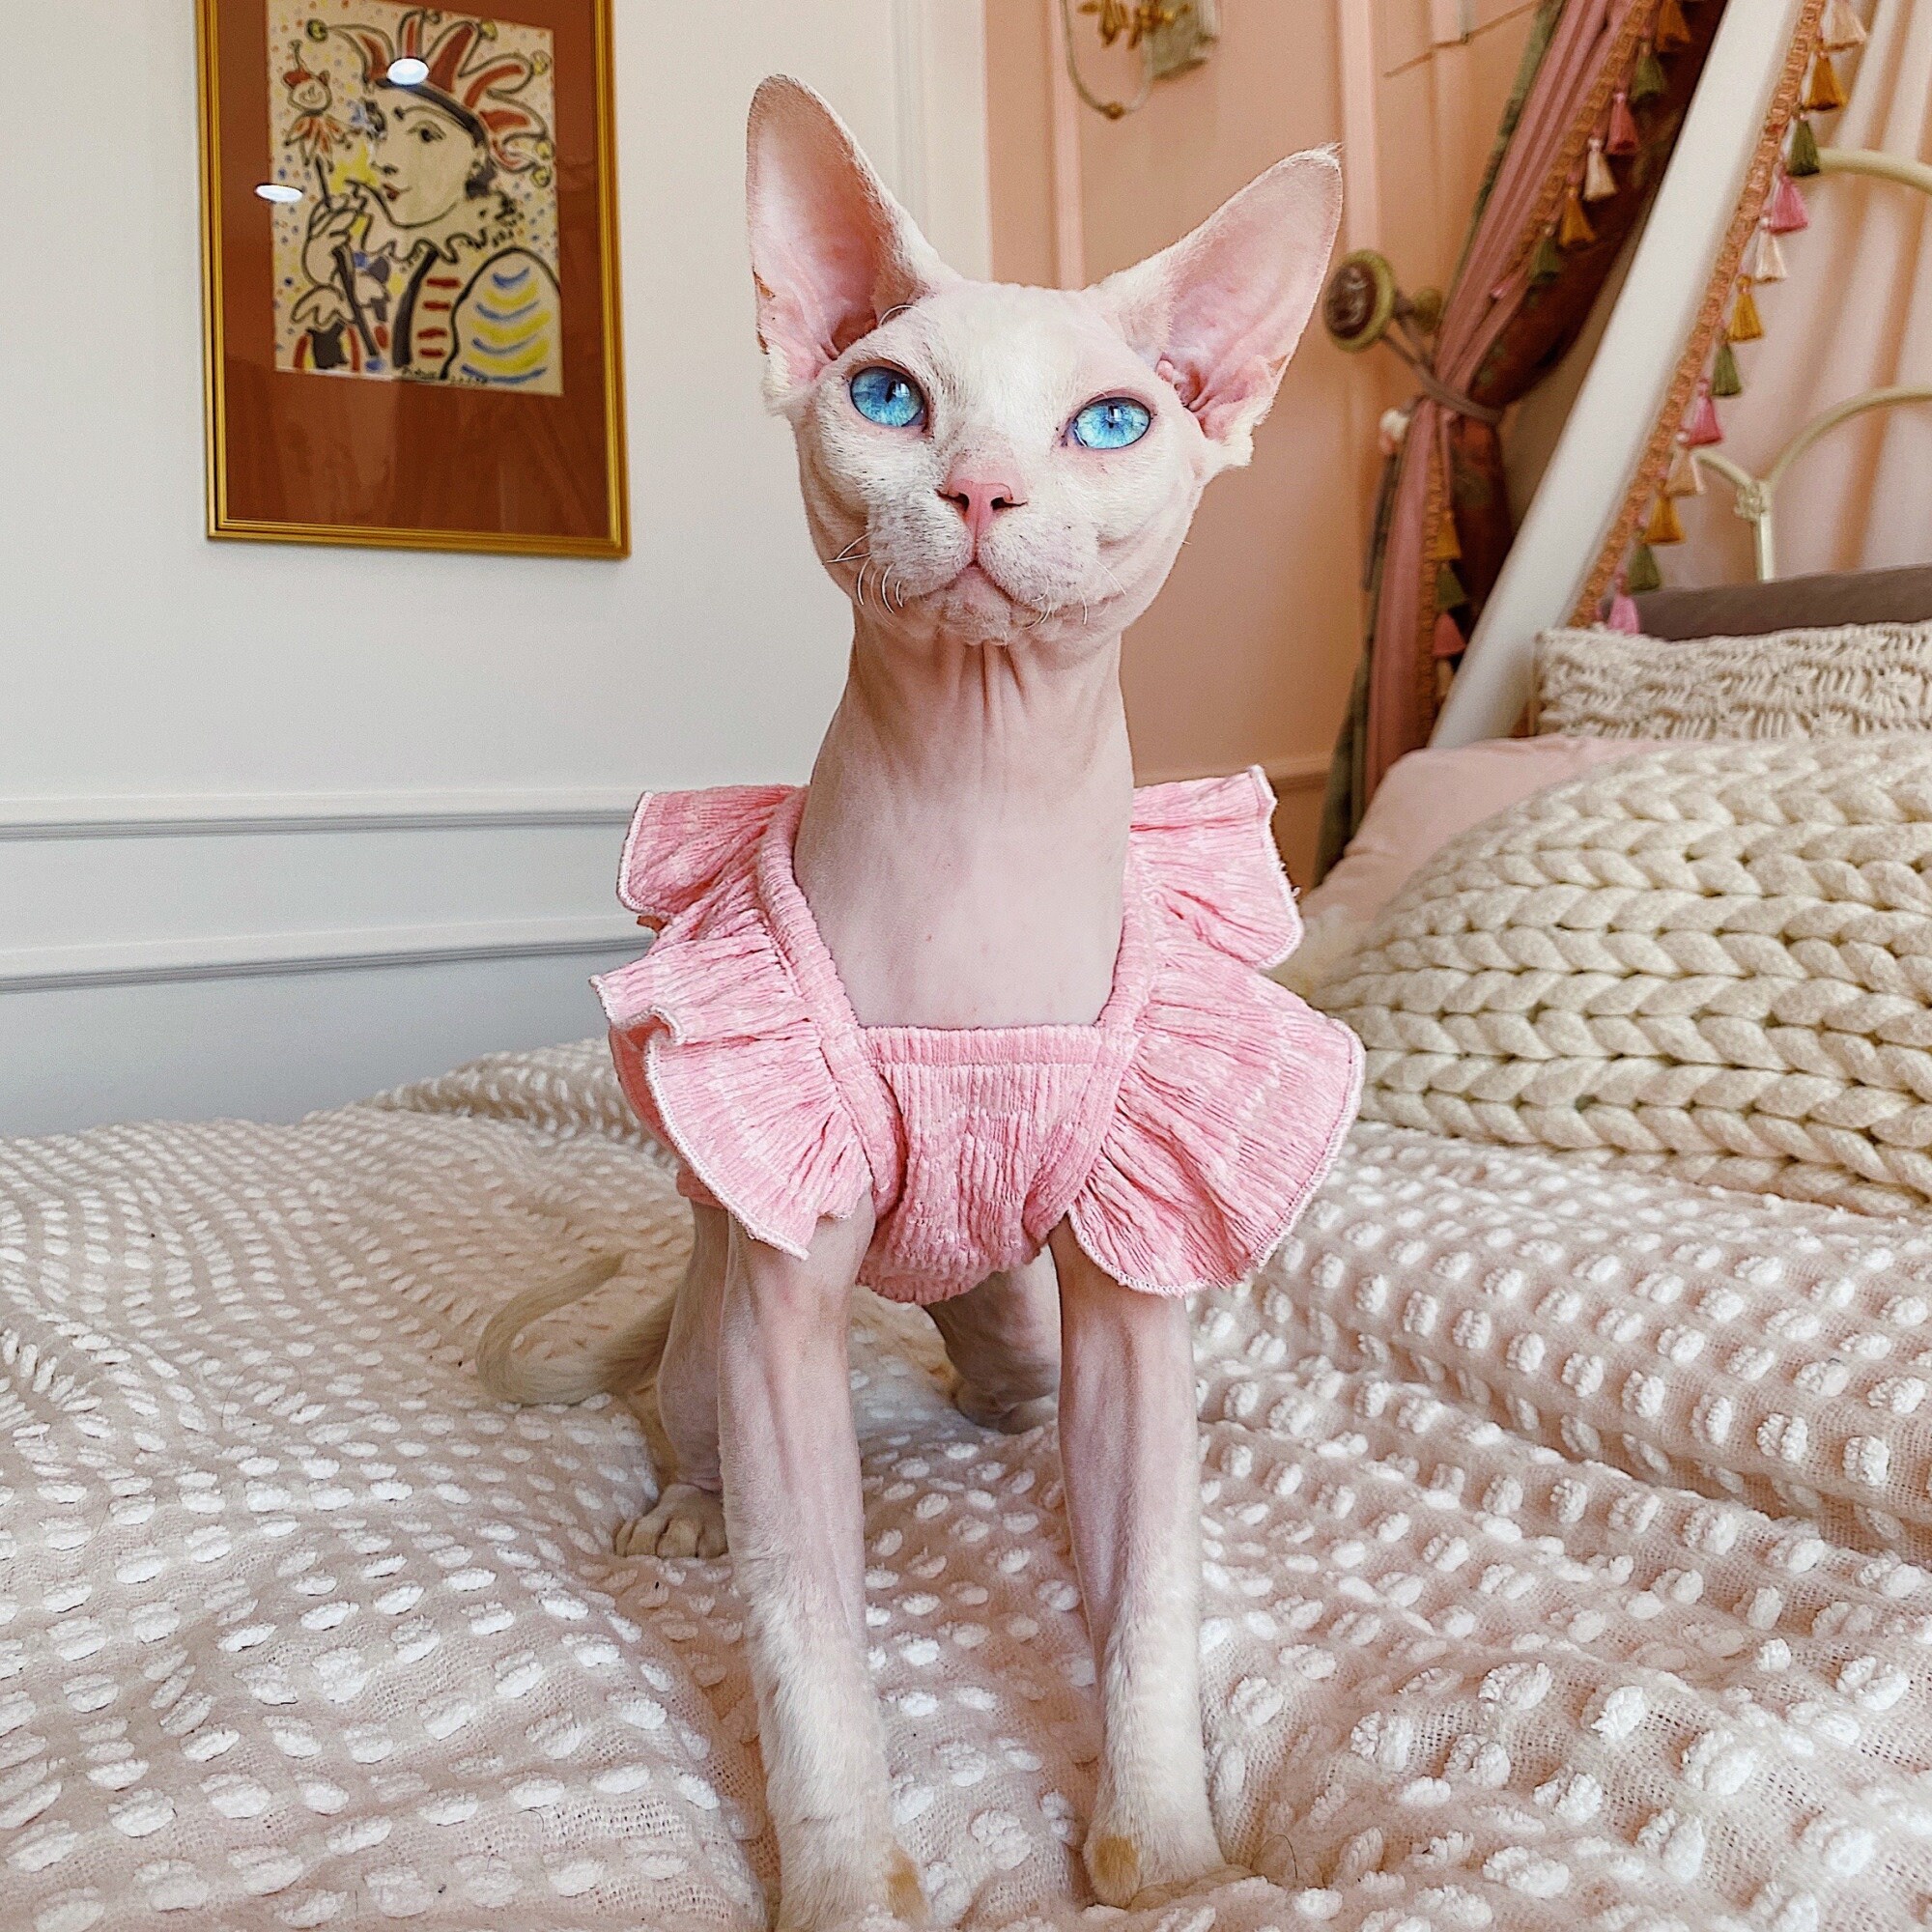 Kotomoda Sphynx Cat's Turtleneck Unicorn In PINK Naked Cat Clothes Hairless  Cat Clothes